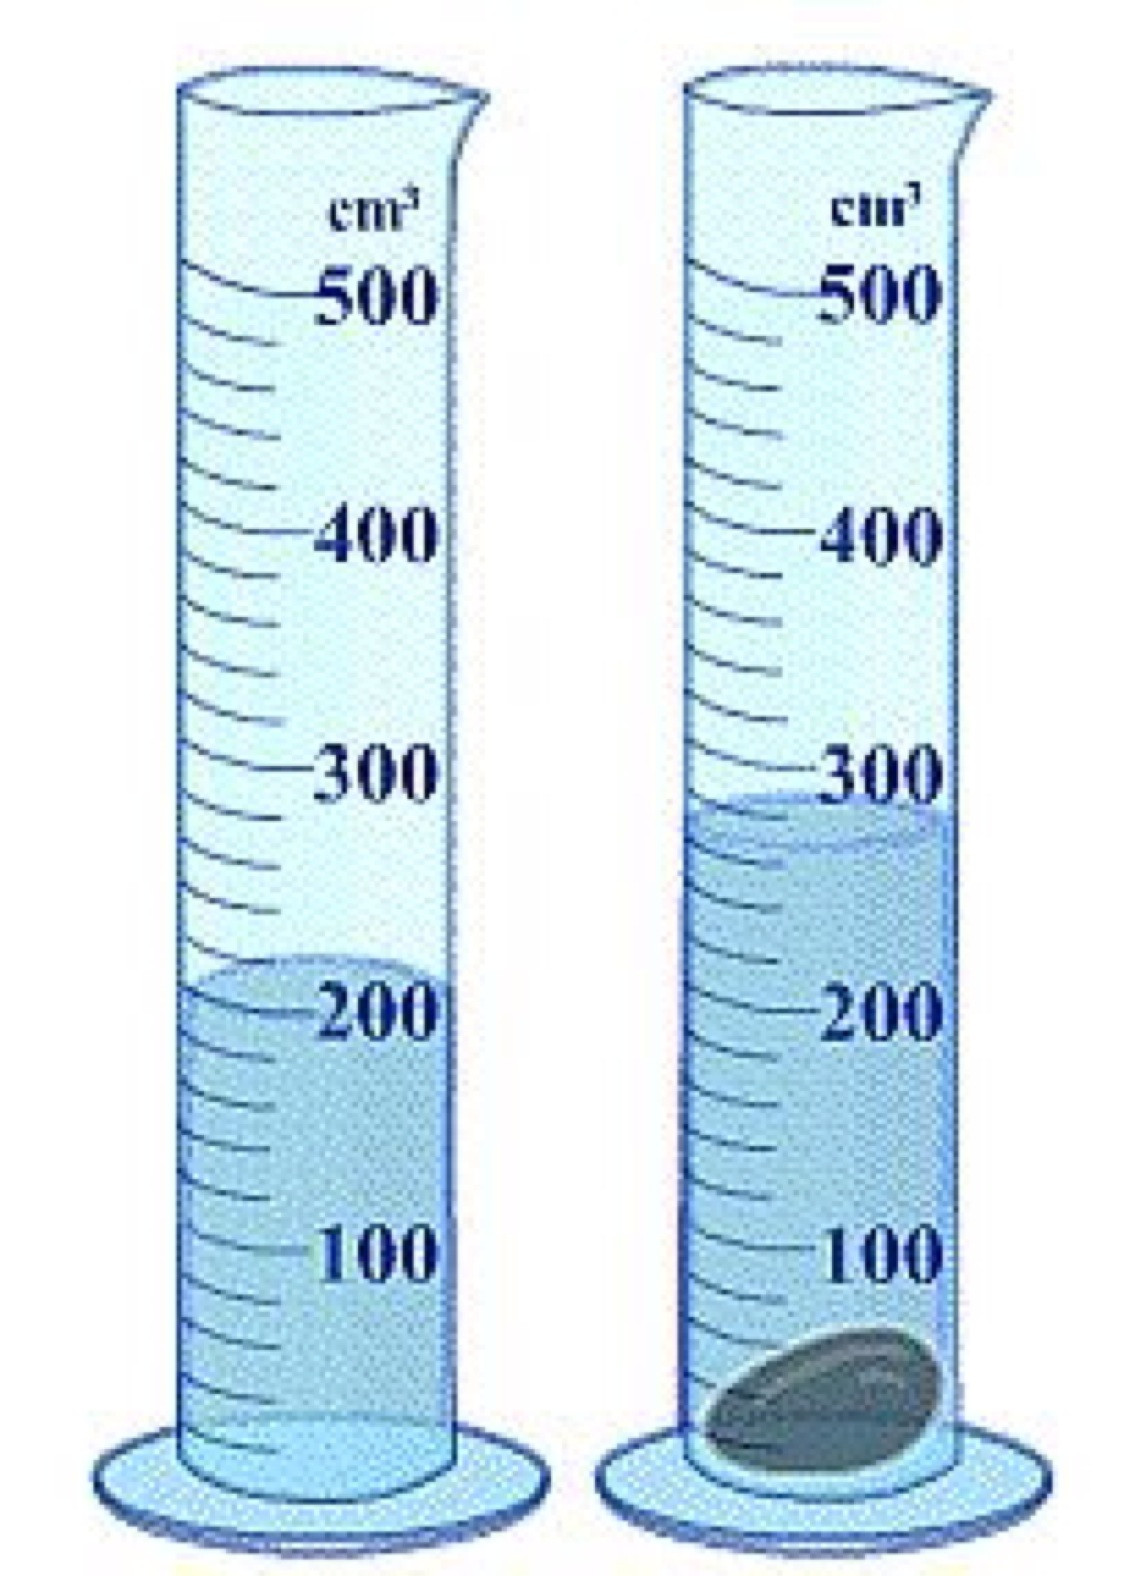 Reading A Graduated Cylinder Worksheet Metric System by Zoe Sax